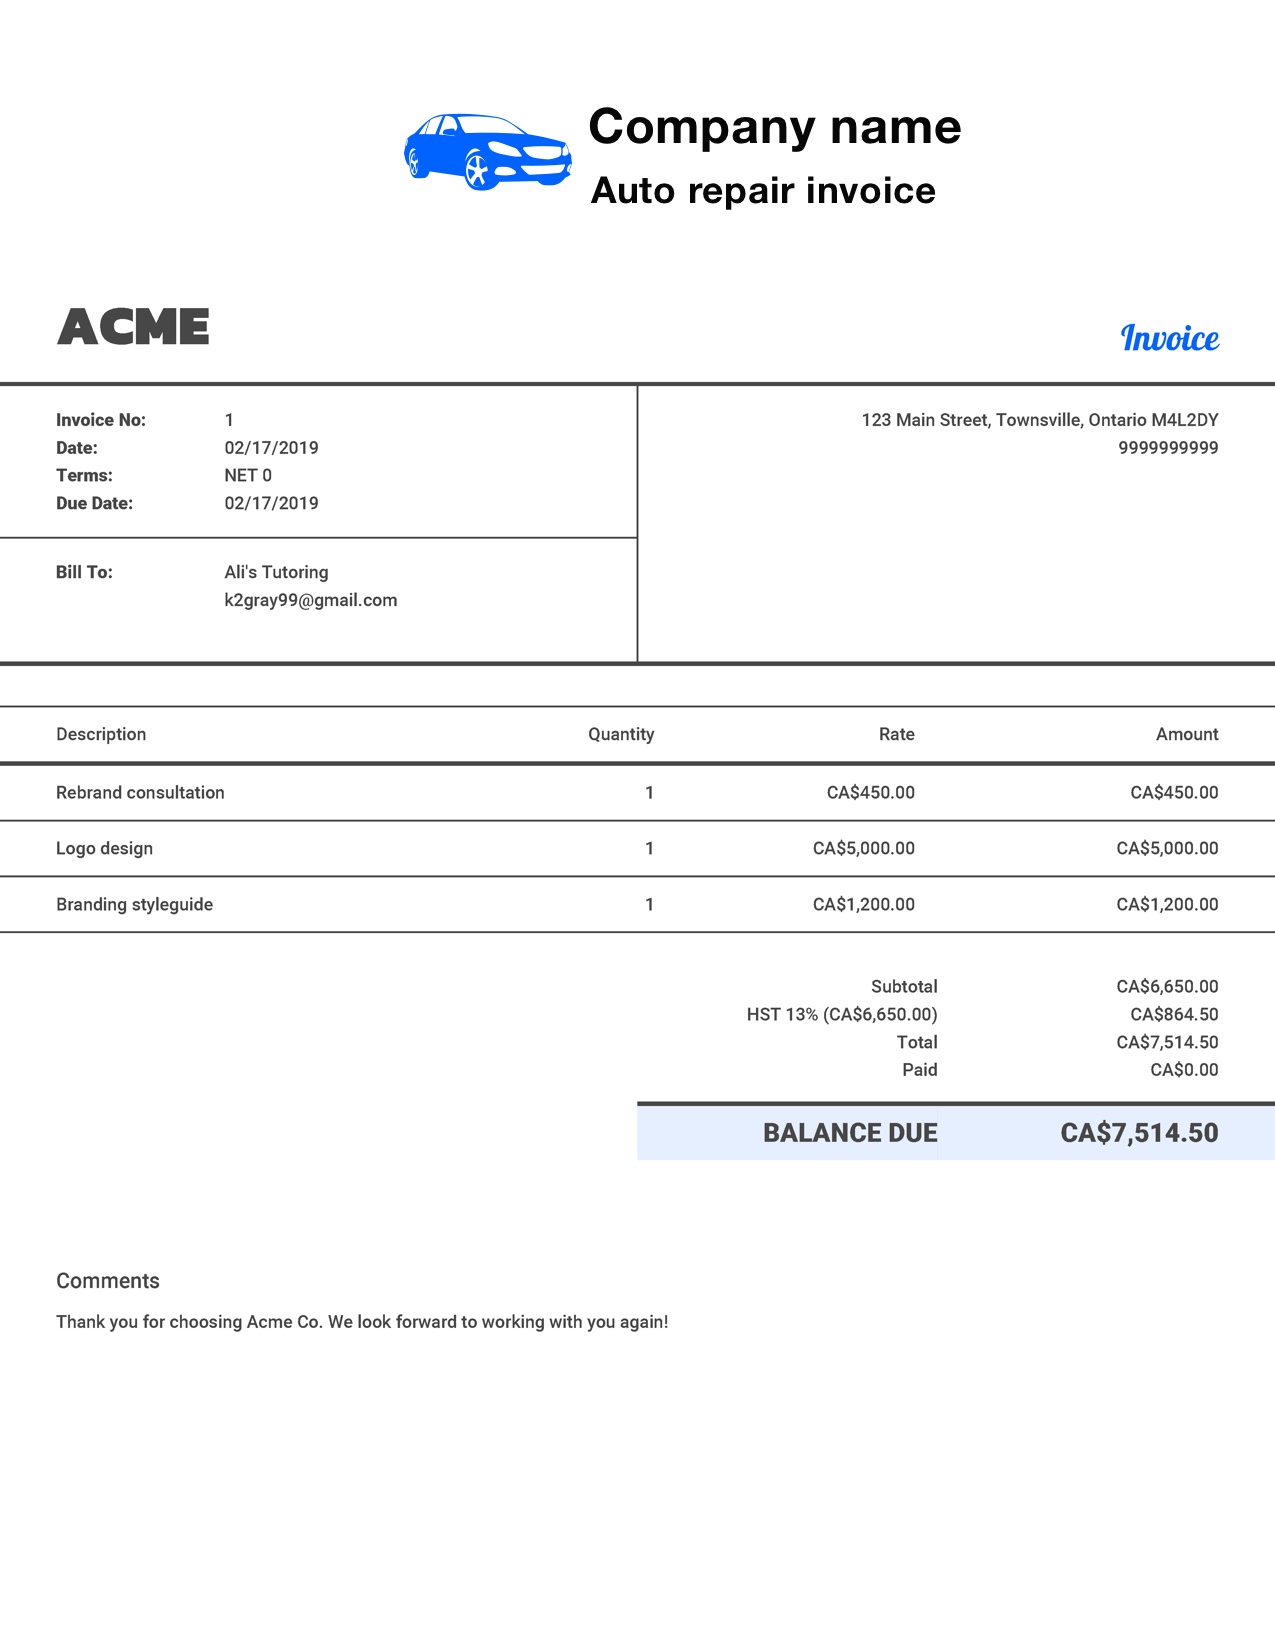 Free Auto Repair Invoice Template. Customize and Send in 90 Seconds